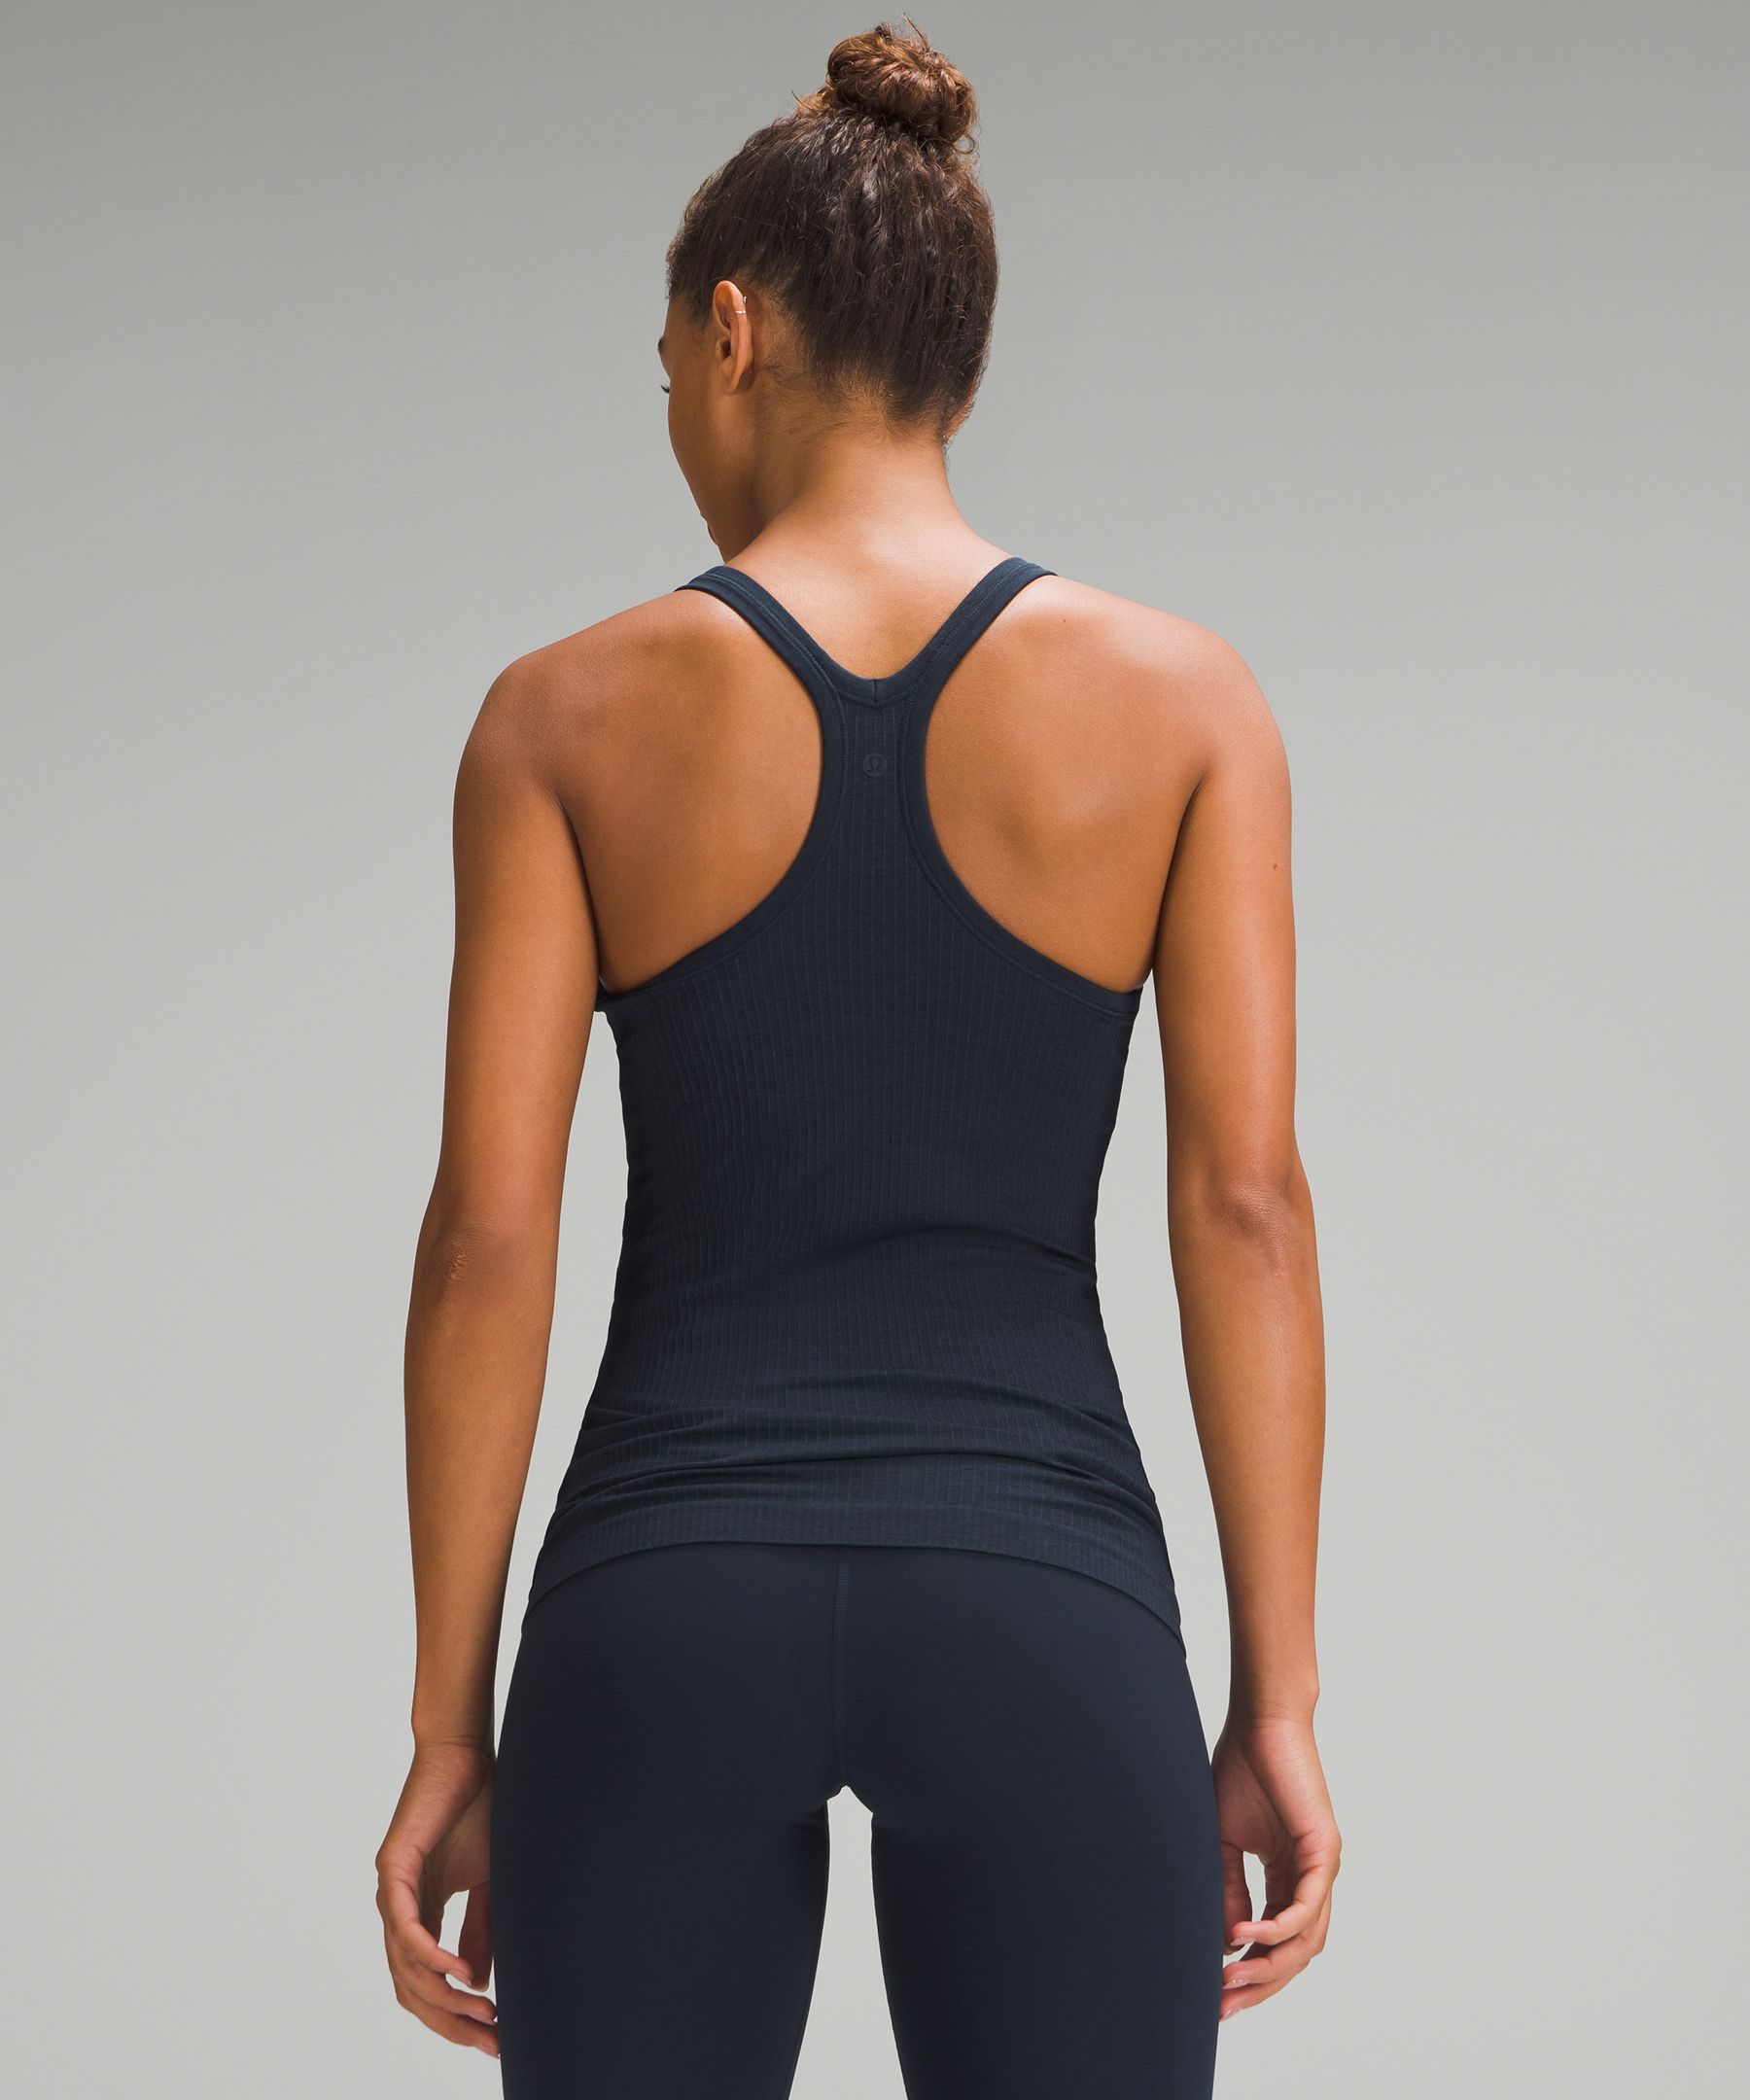 Just got the Ebb to Street tank from Lulu and I am OBSESSED! Need it i, Lulu